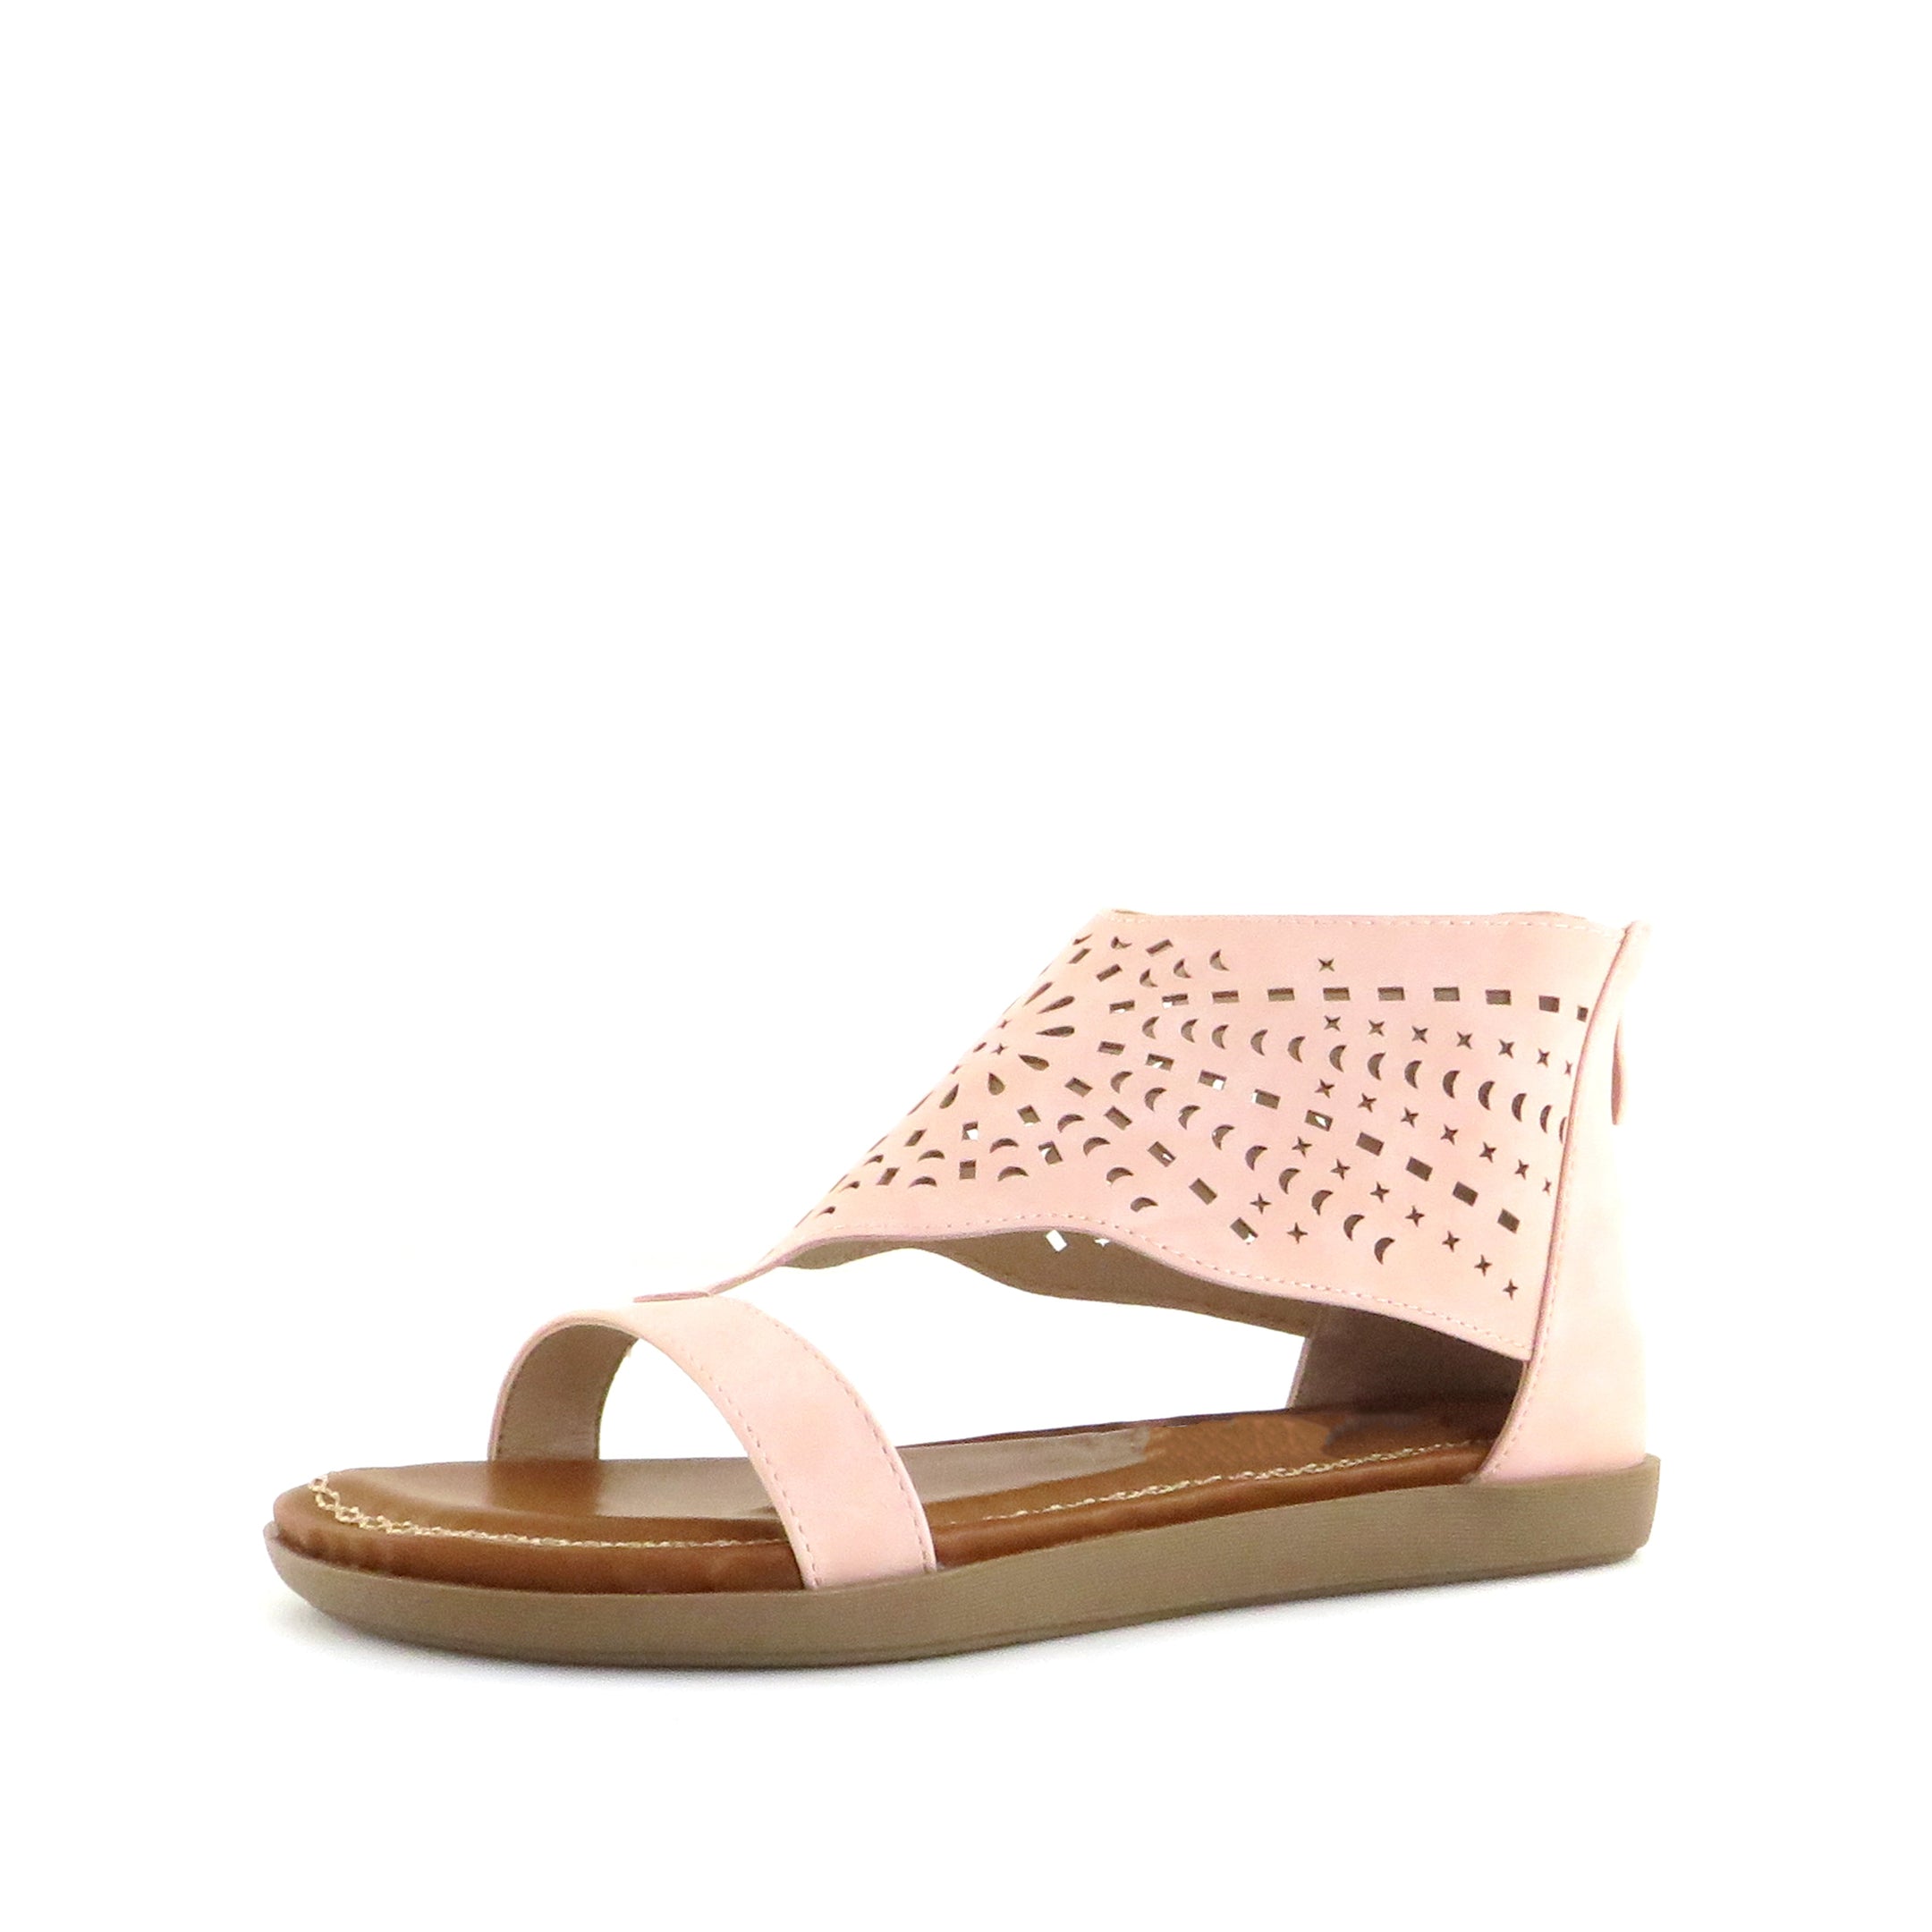 Buy Women's Crissy Peach Perforated Sandal by Nest Shoes